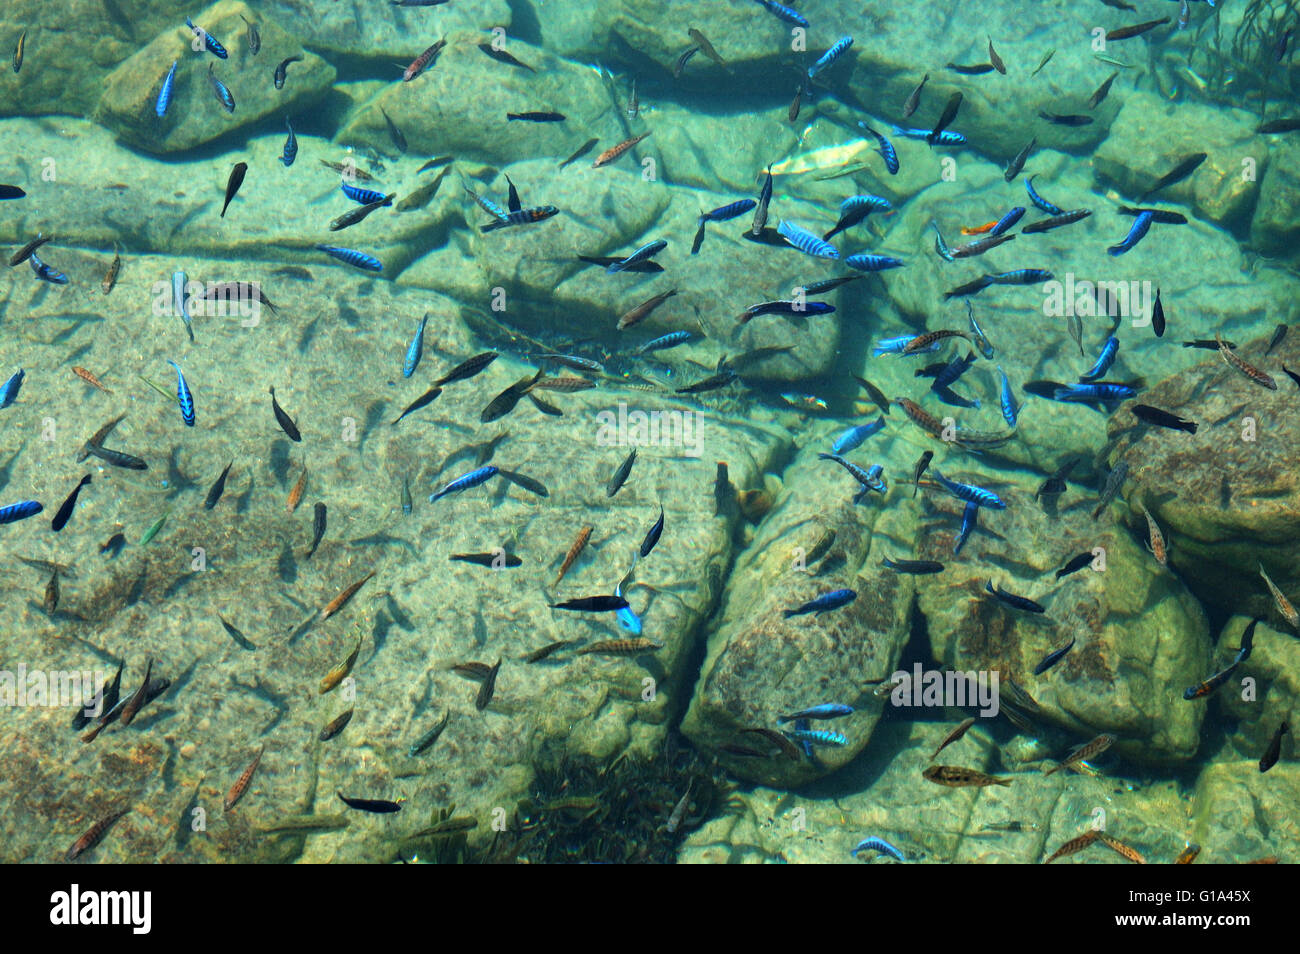 Numerous fish (Cichlids) in the clear crystal water of Lake Malawi National Park Stock Photo